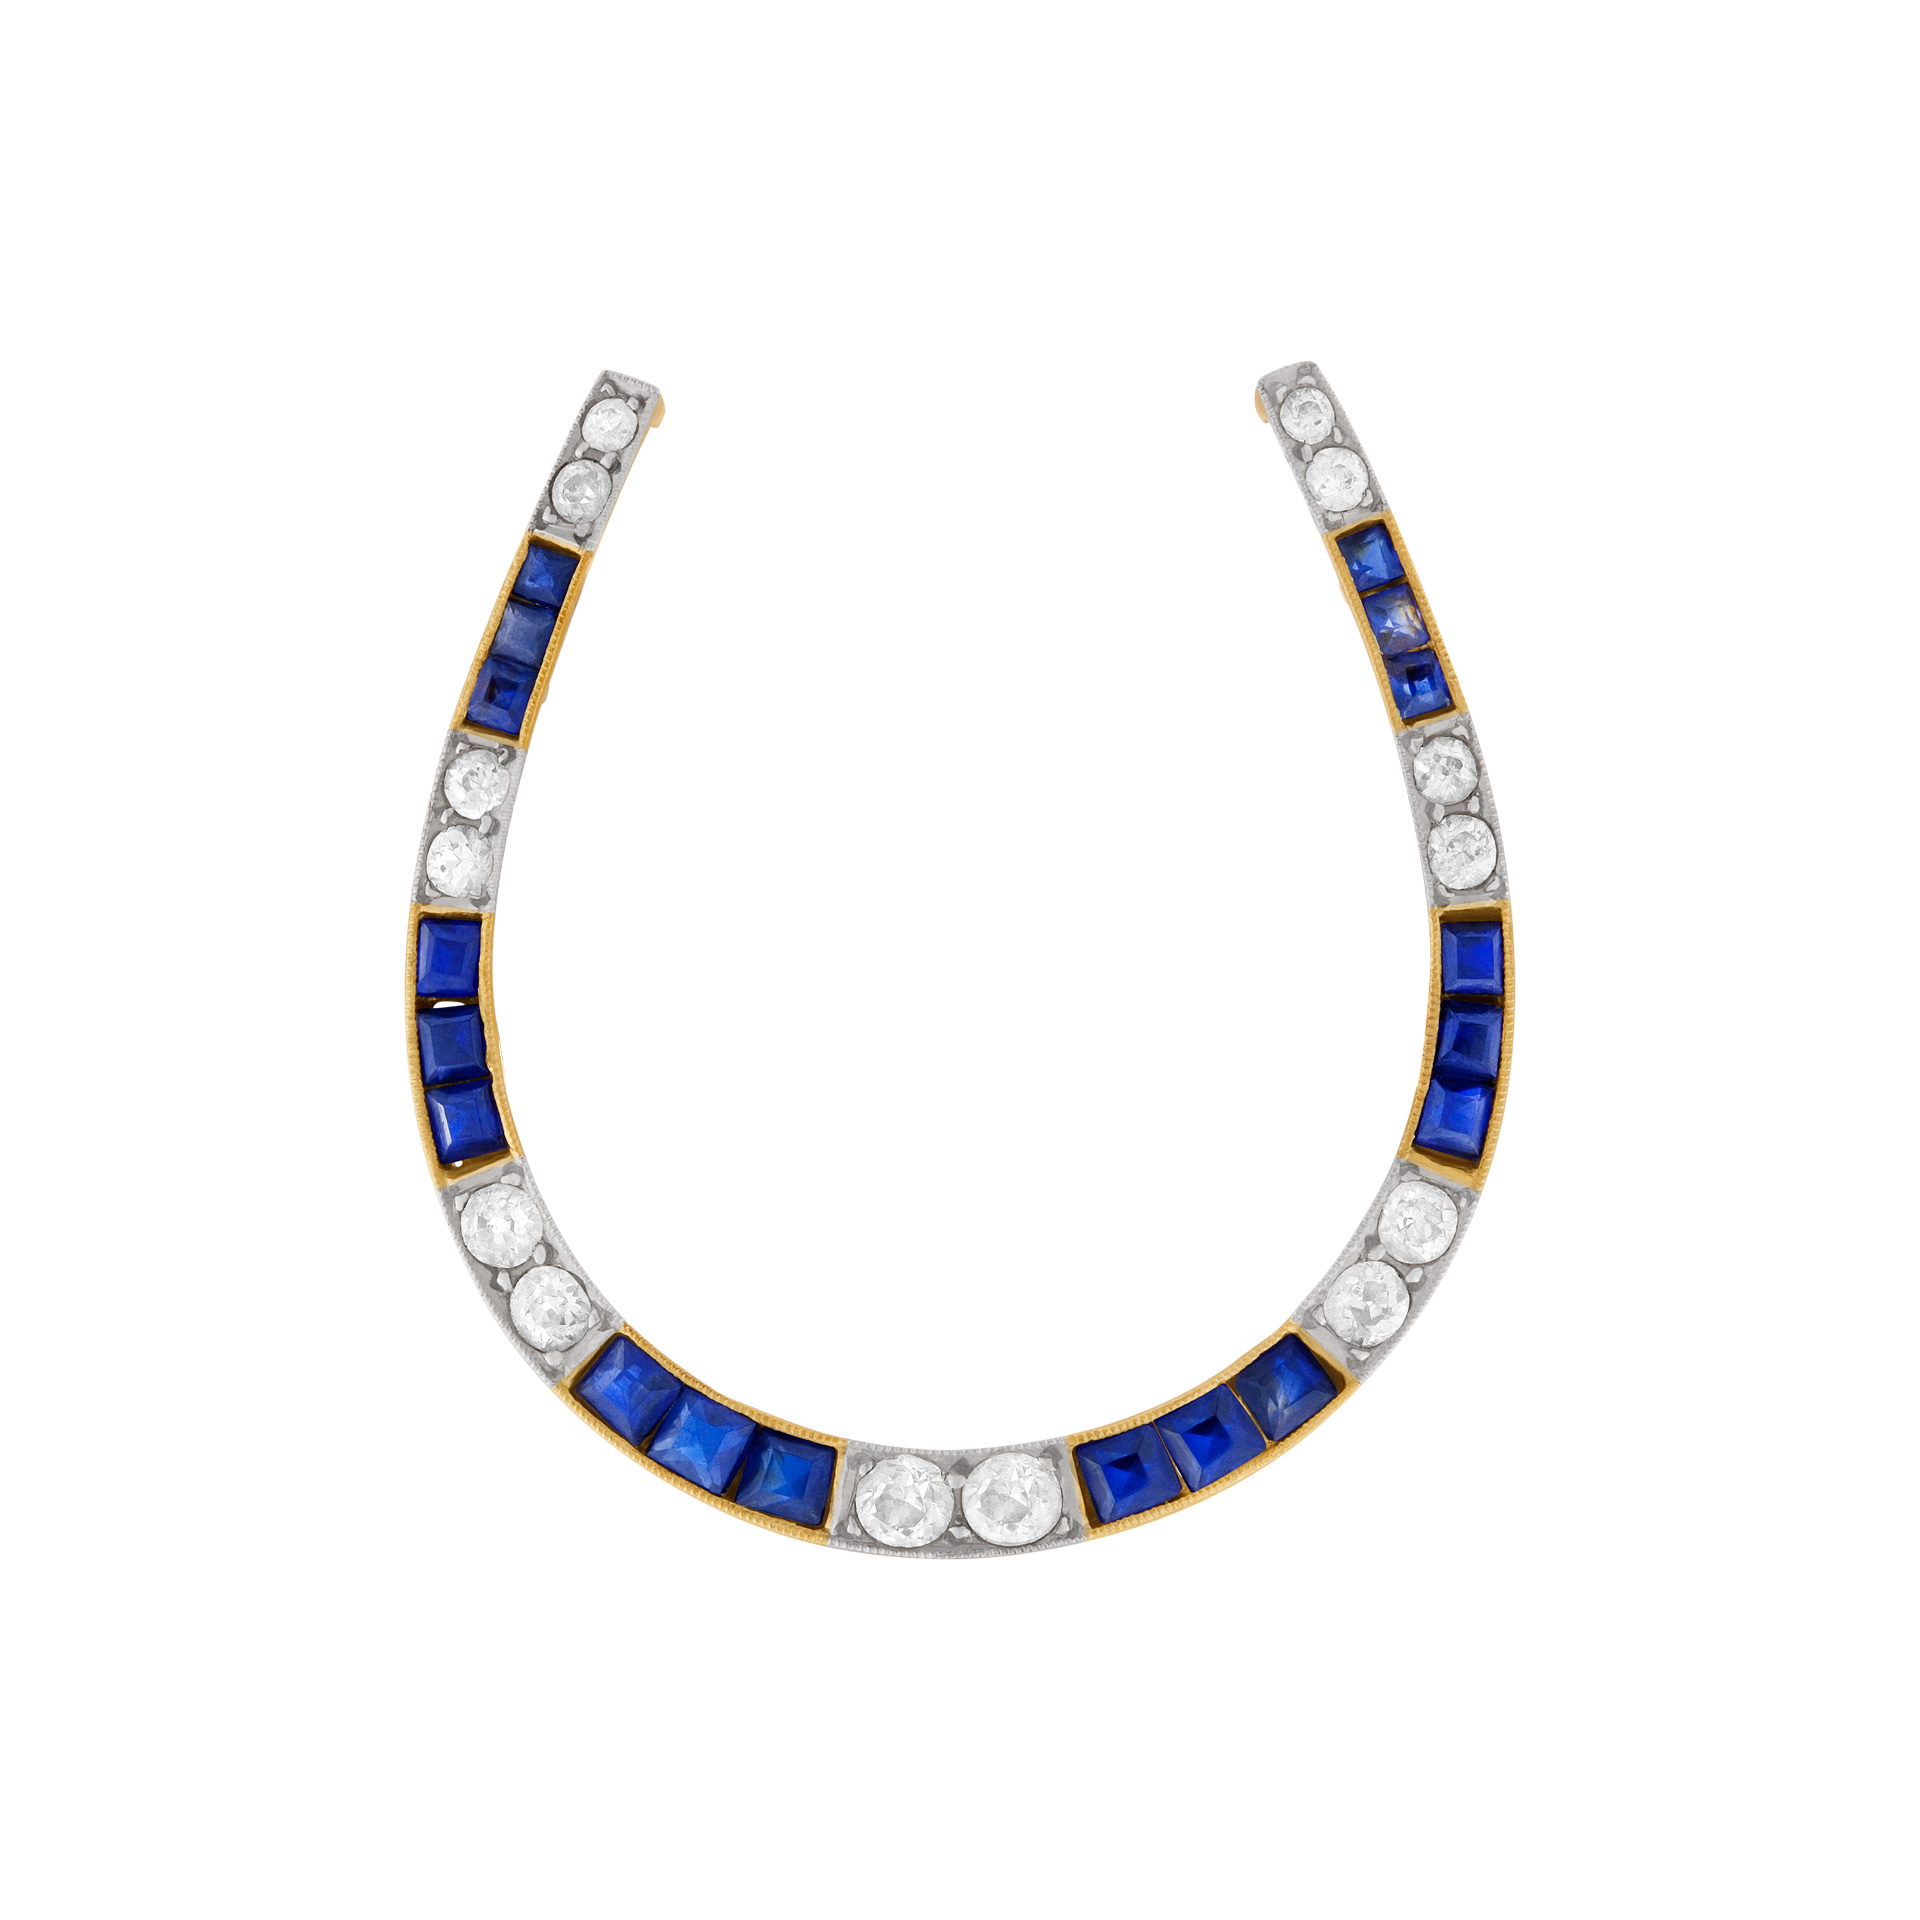 Lucky Horse Shoe broach / pin  in 18K with diamonds and sapphires